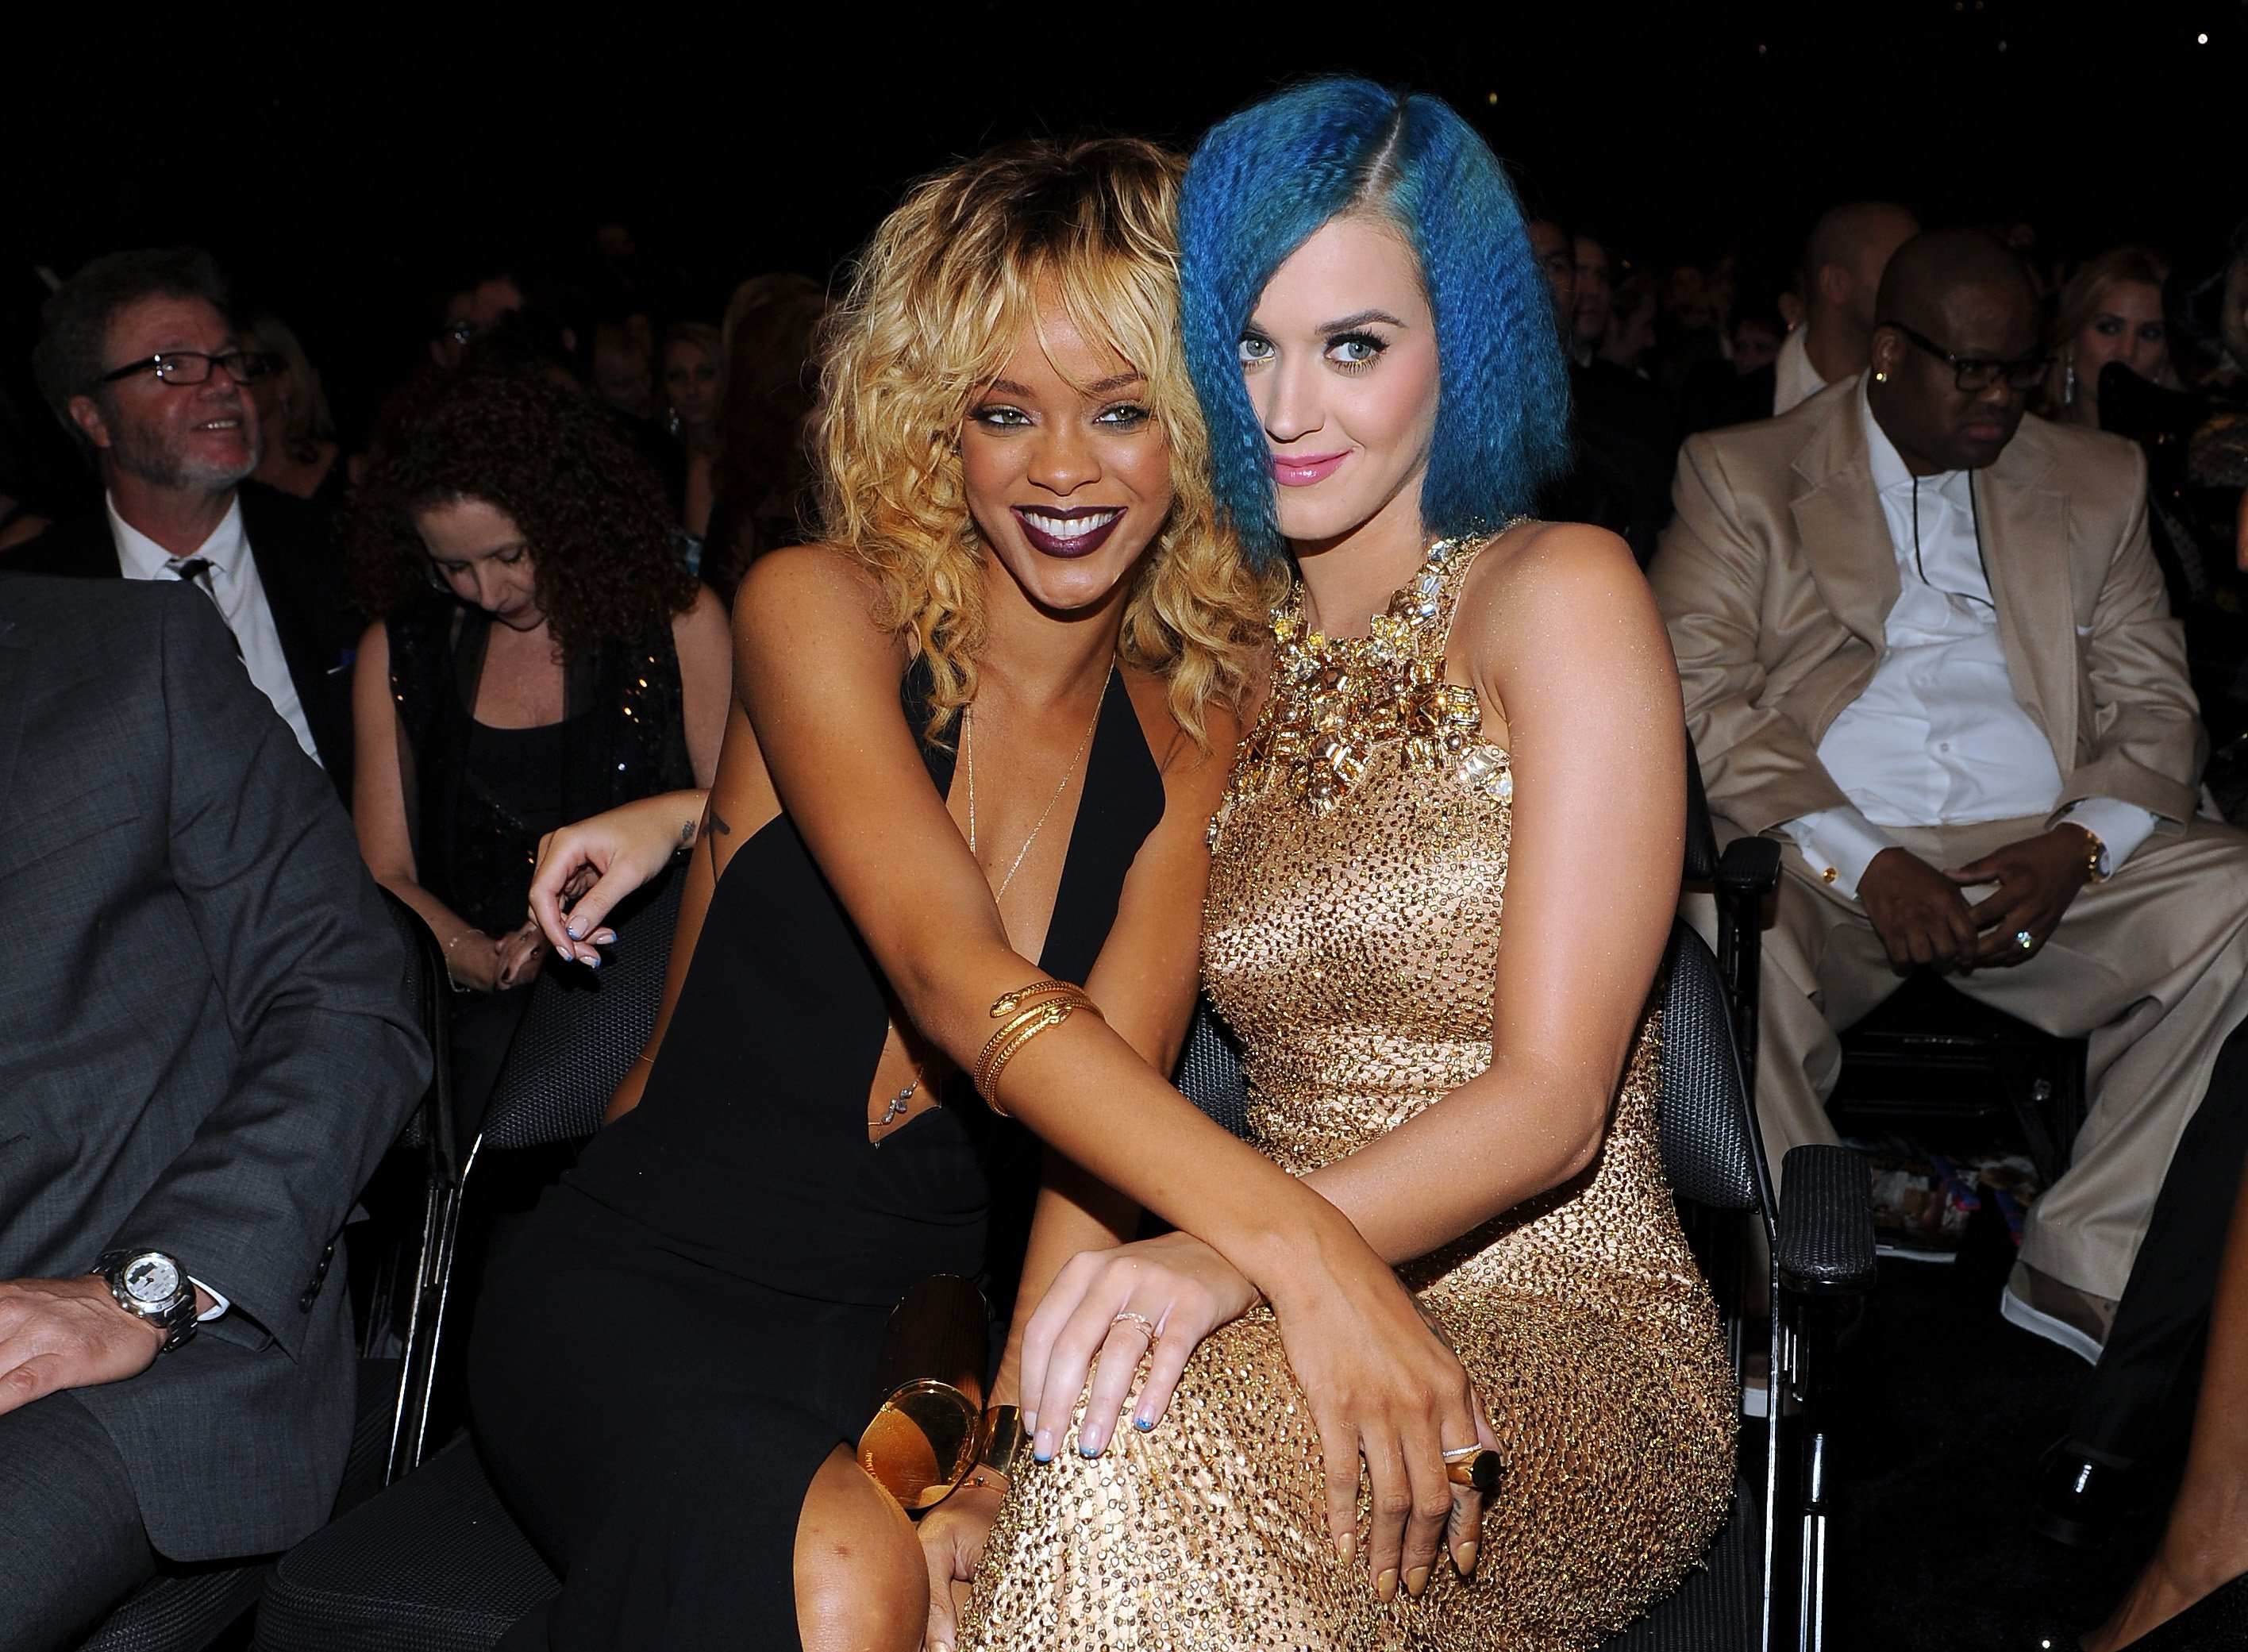 Rihanna and Katy Perry sitting next to each other